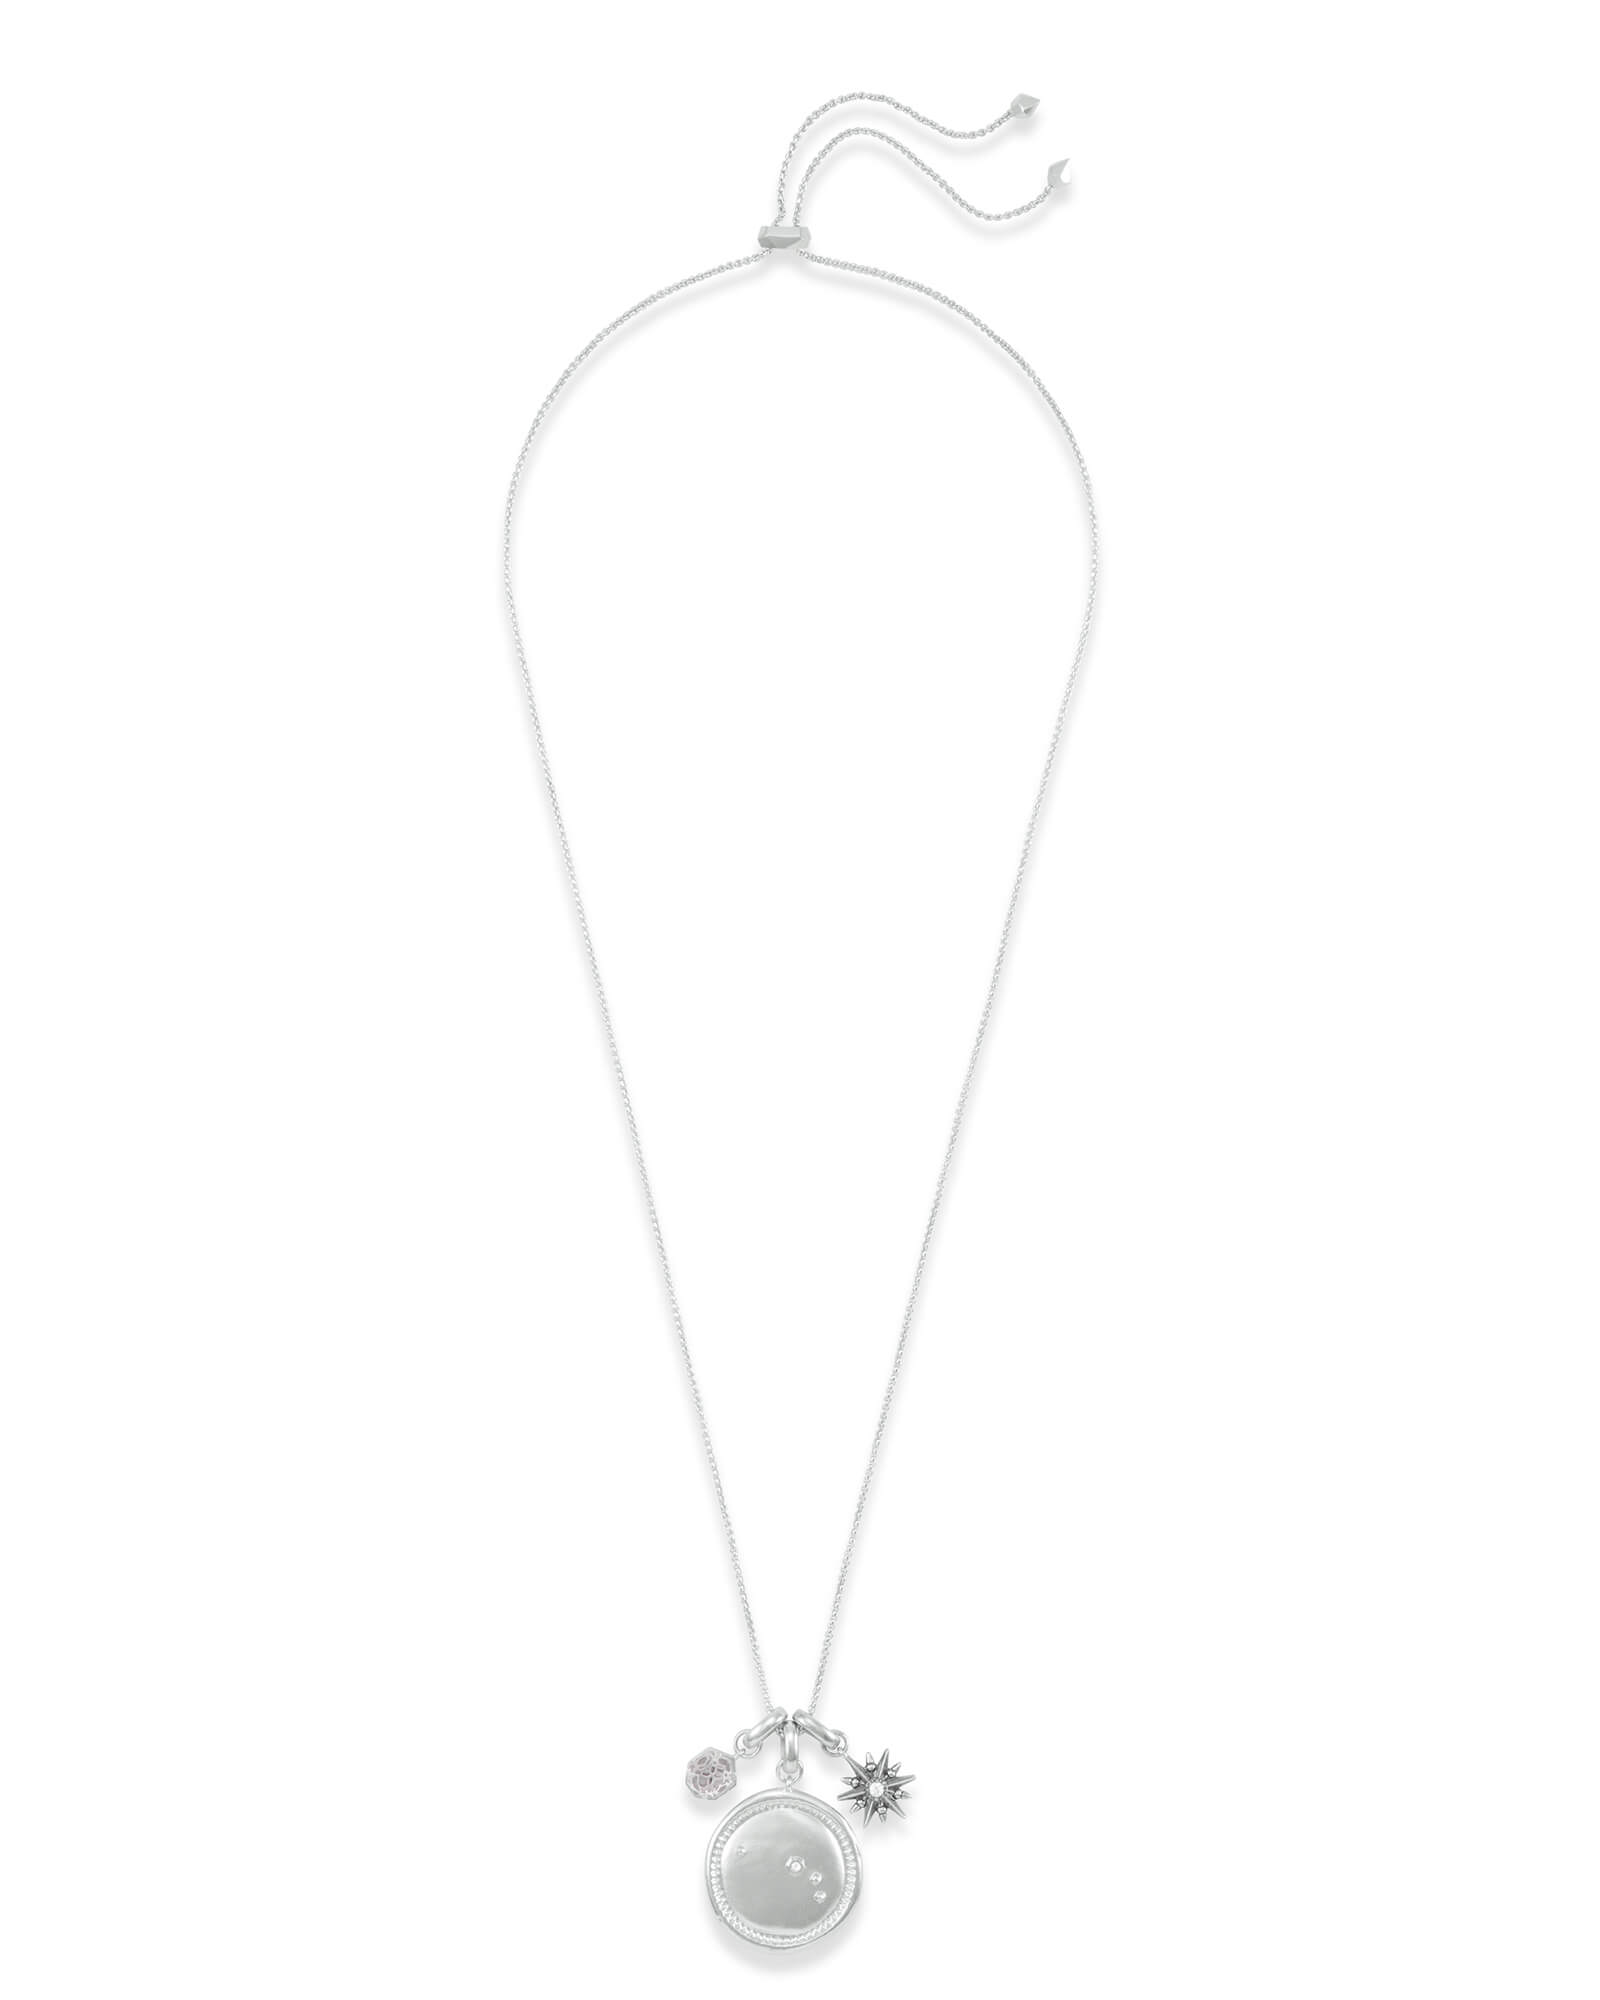 April Aries Charm Necklace Set in Silver | Kendra Scott